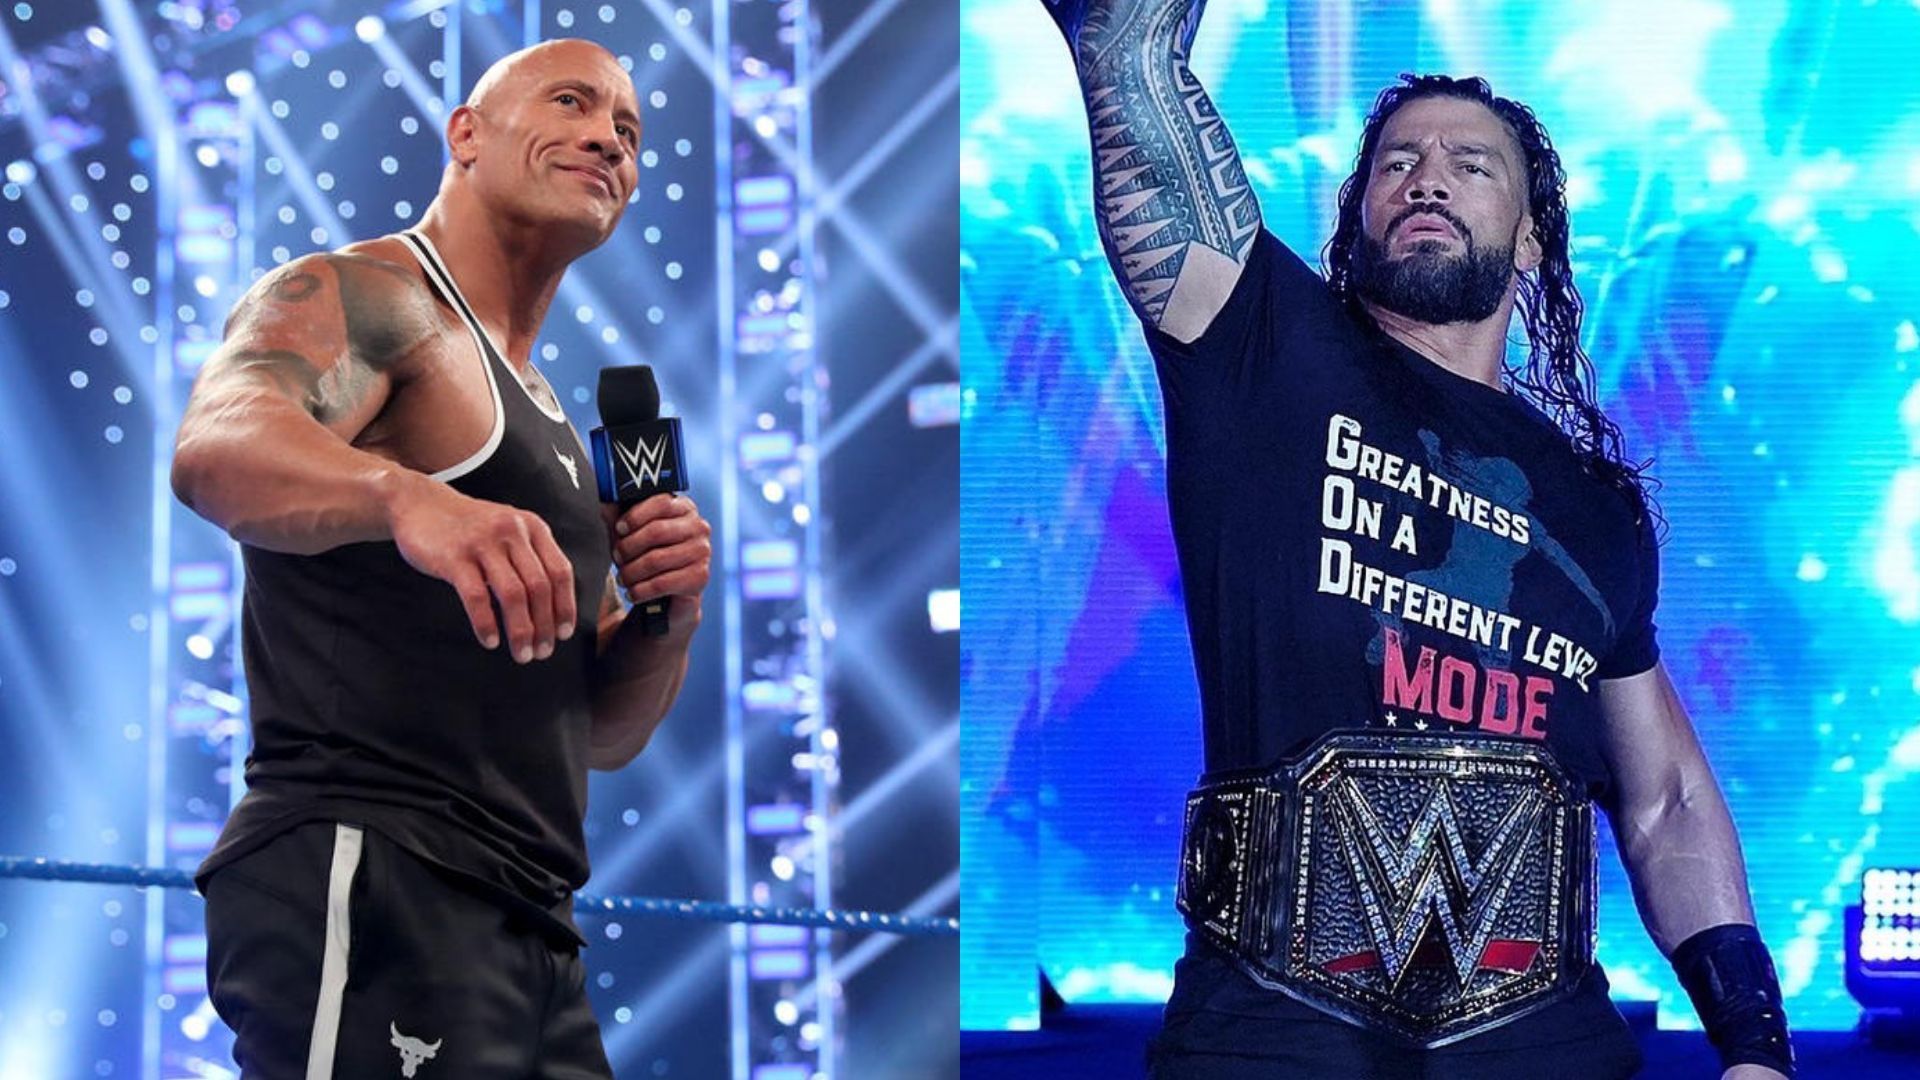 The Rock and Roman Reigns are cousins.